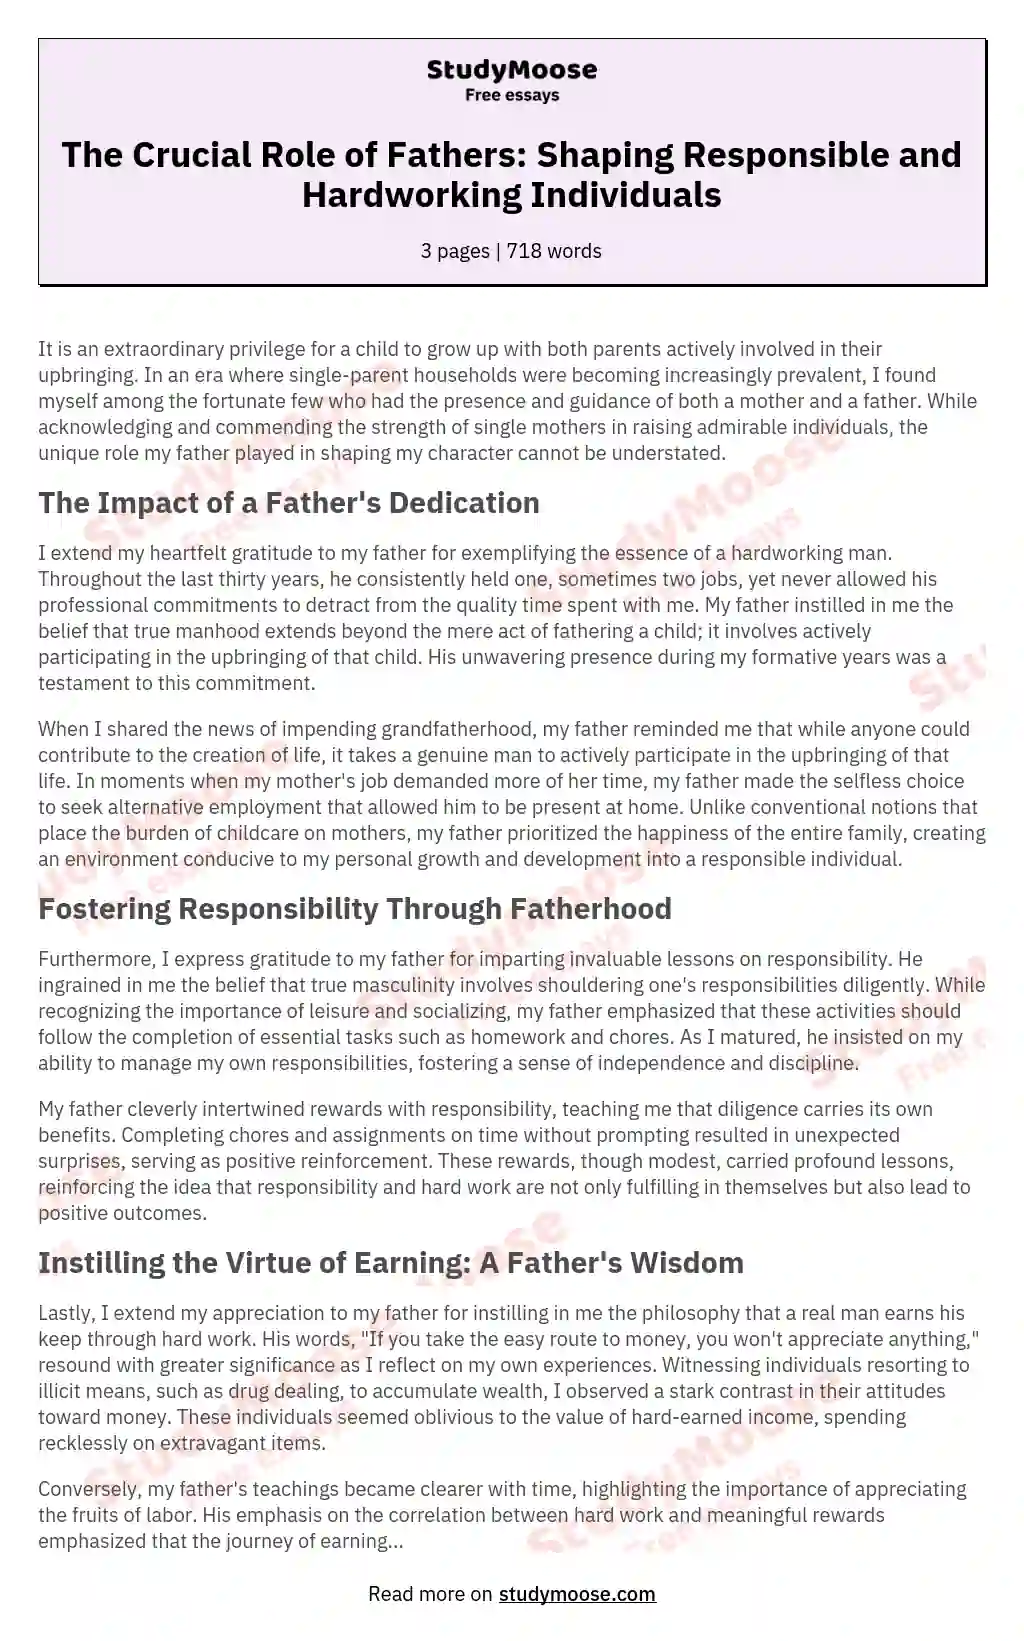 The Crucial Role of Fathers: Shaping Responsible and Hardworking Individuals essay